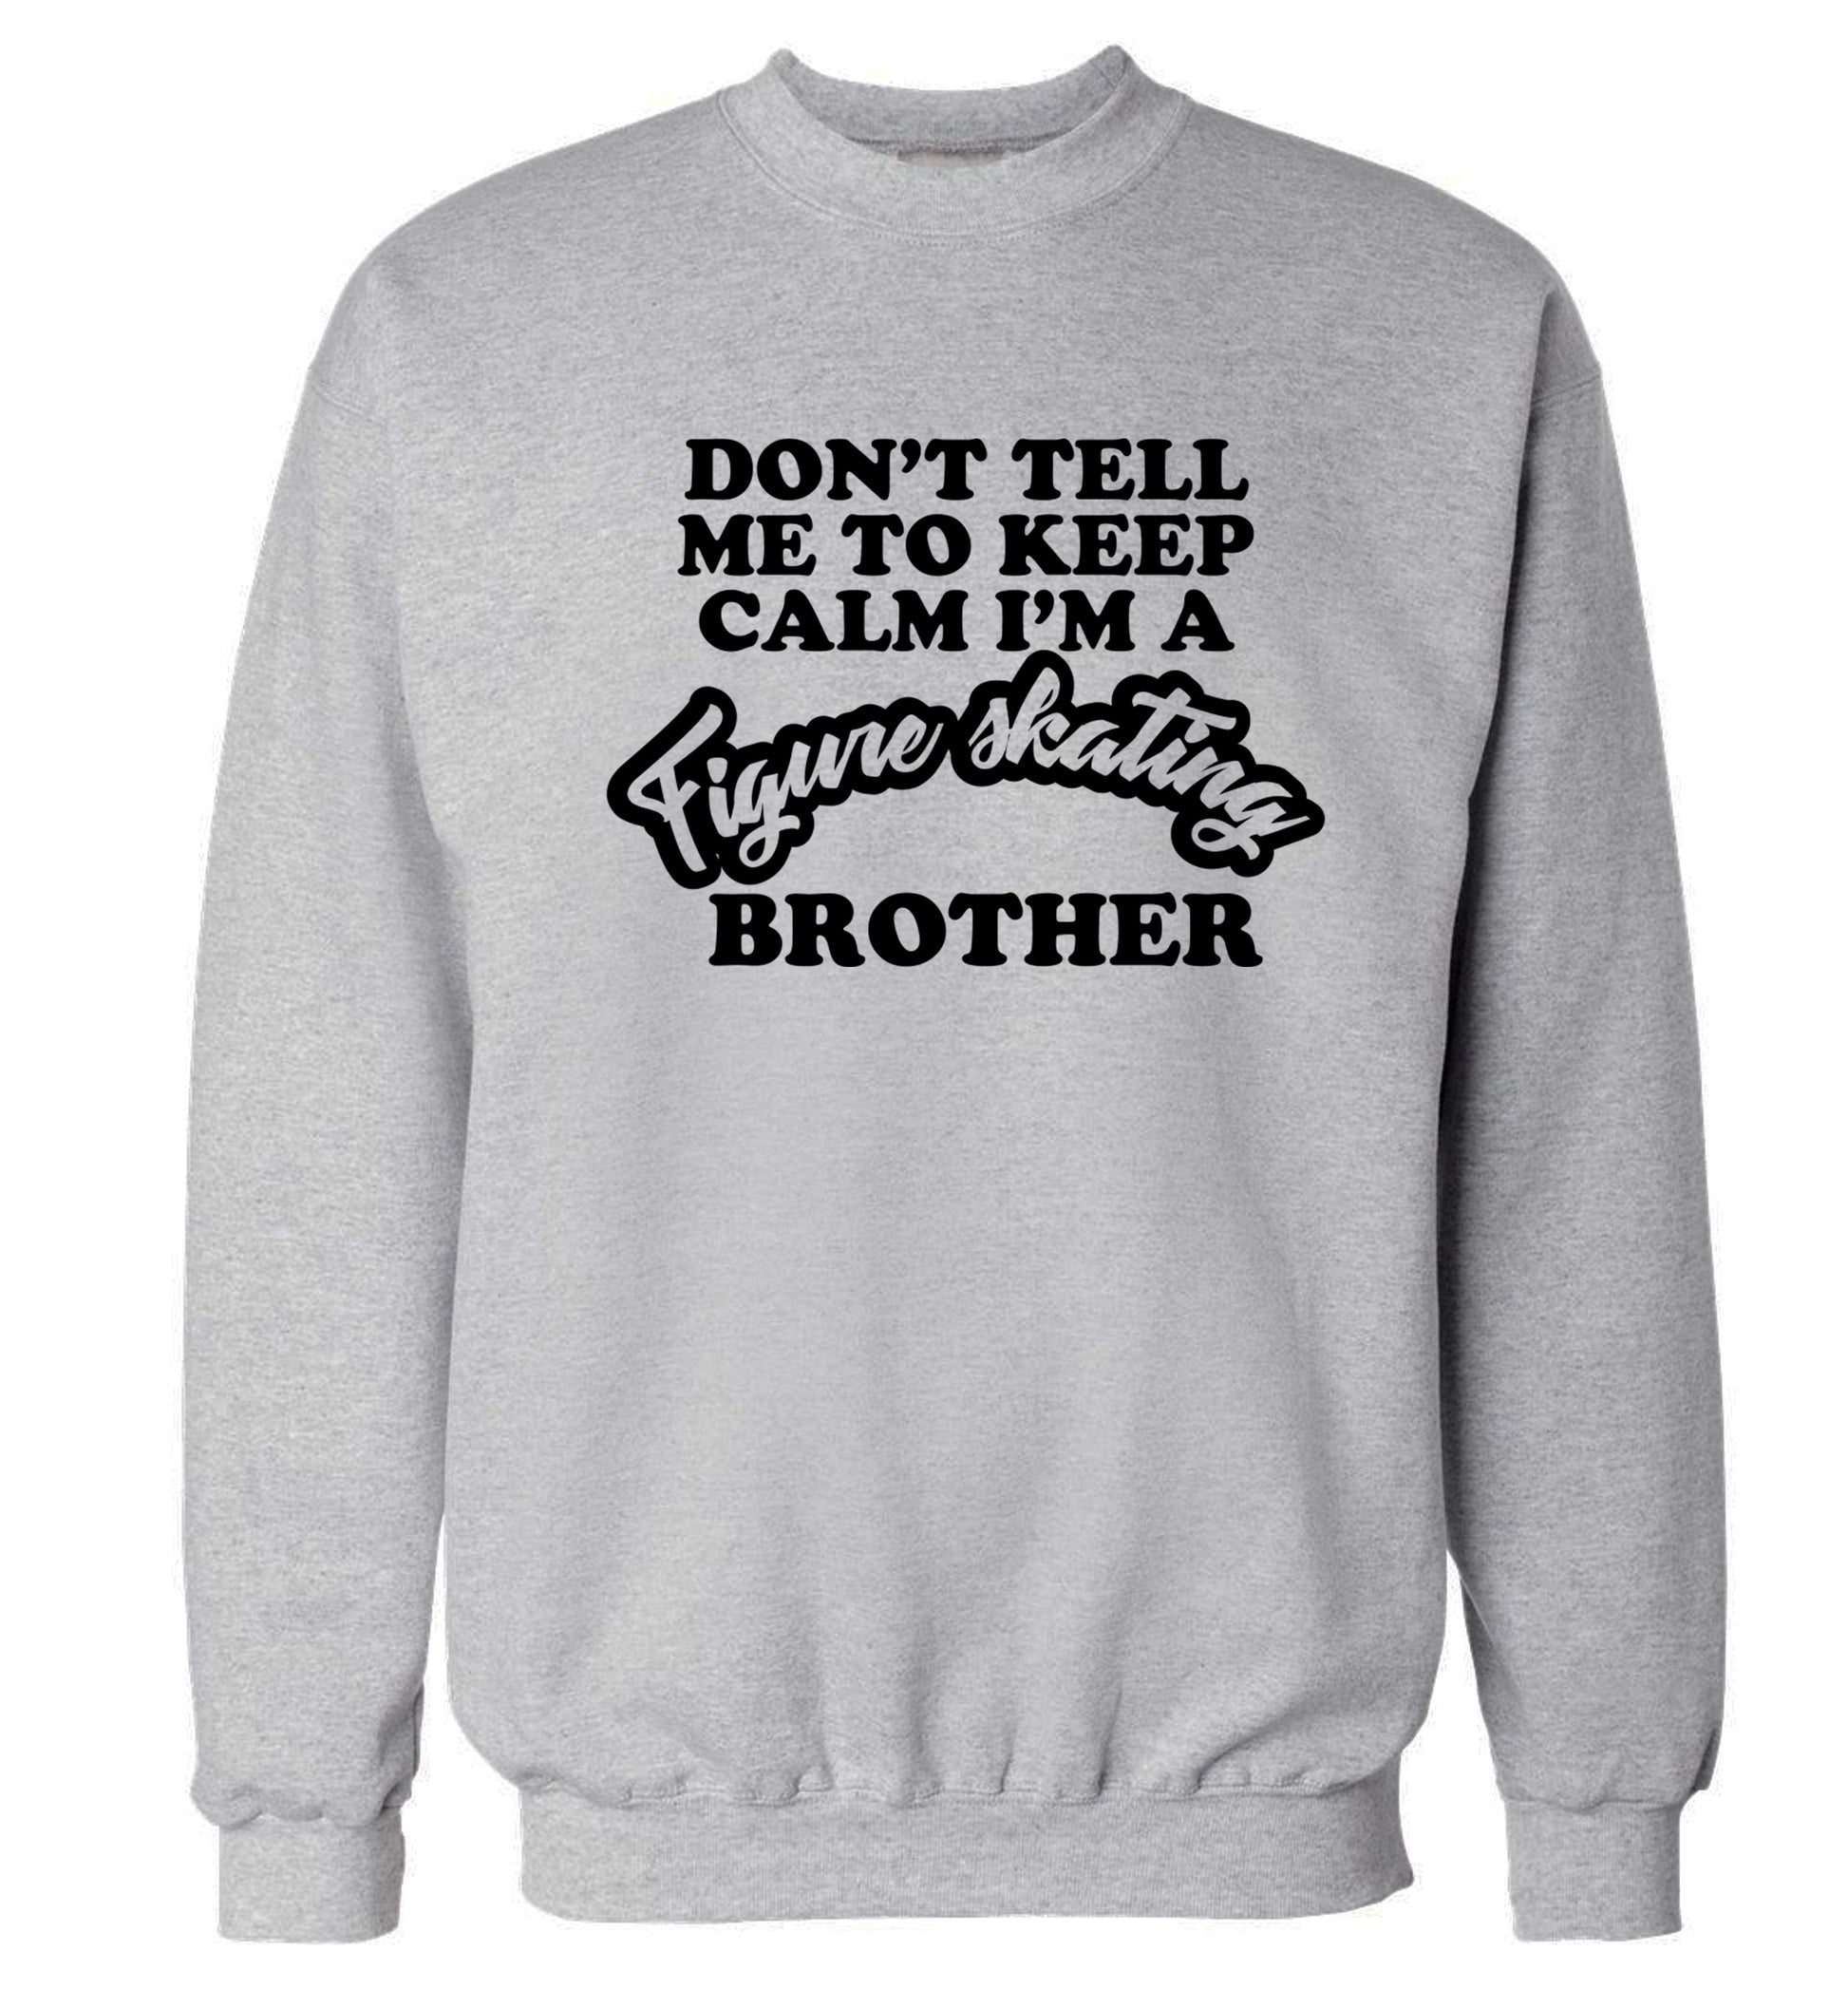 Don't tell me to keep calm I'm a figure skating brother Adult's unisexgrey Sweater 2XL